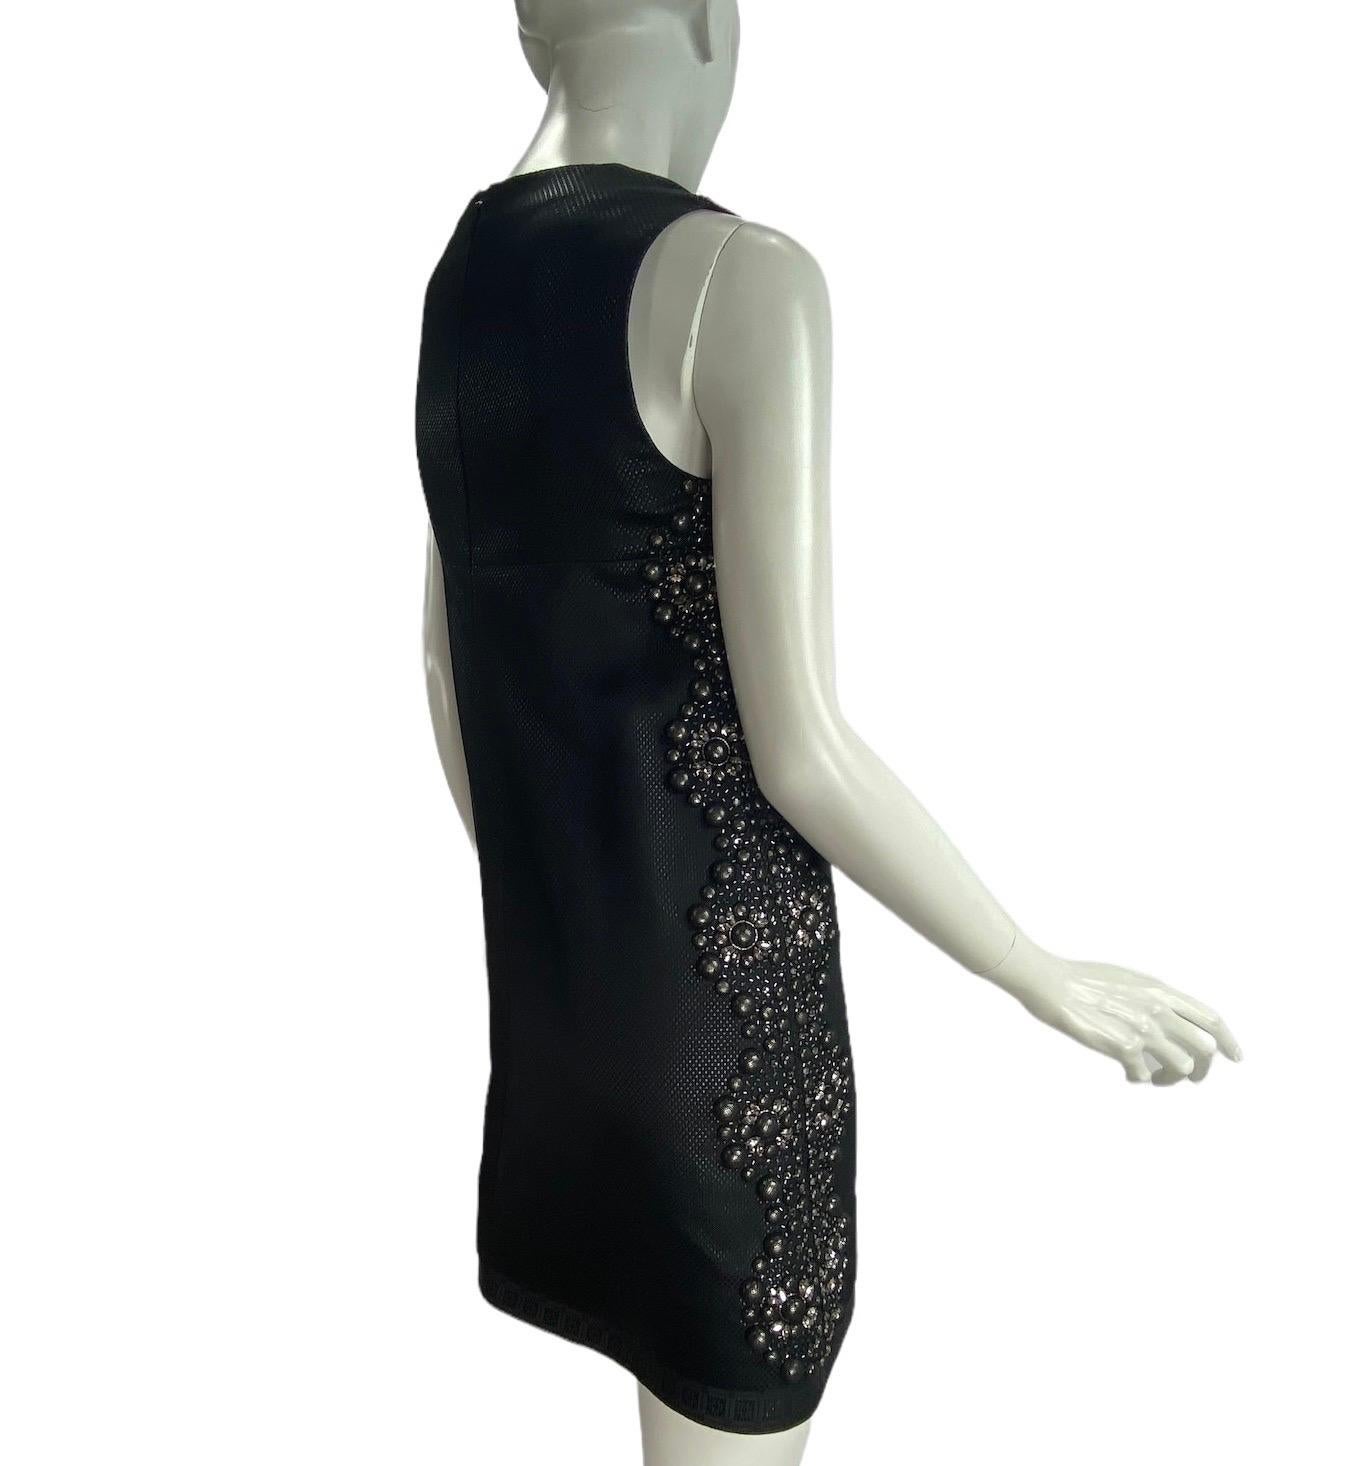 2006 Vintage Gucci Studded and Crystal Embellished Black Dress
Italian Size 38 - US 2/4
A-Line Style, Studs covered with tulle, crystals, beads. Fully lined, Sleeveless, Zipper on the back.
Measurements: Bust 32 inches, waist 34